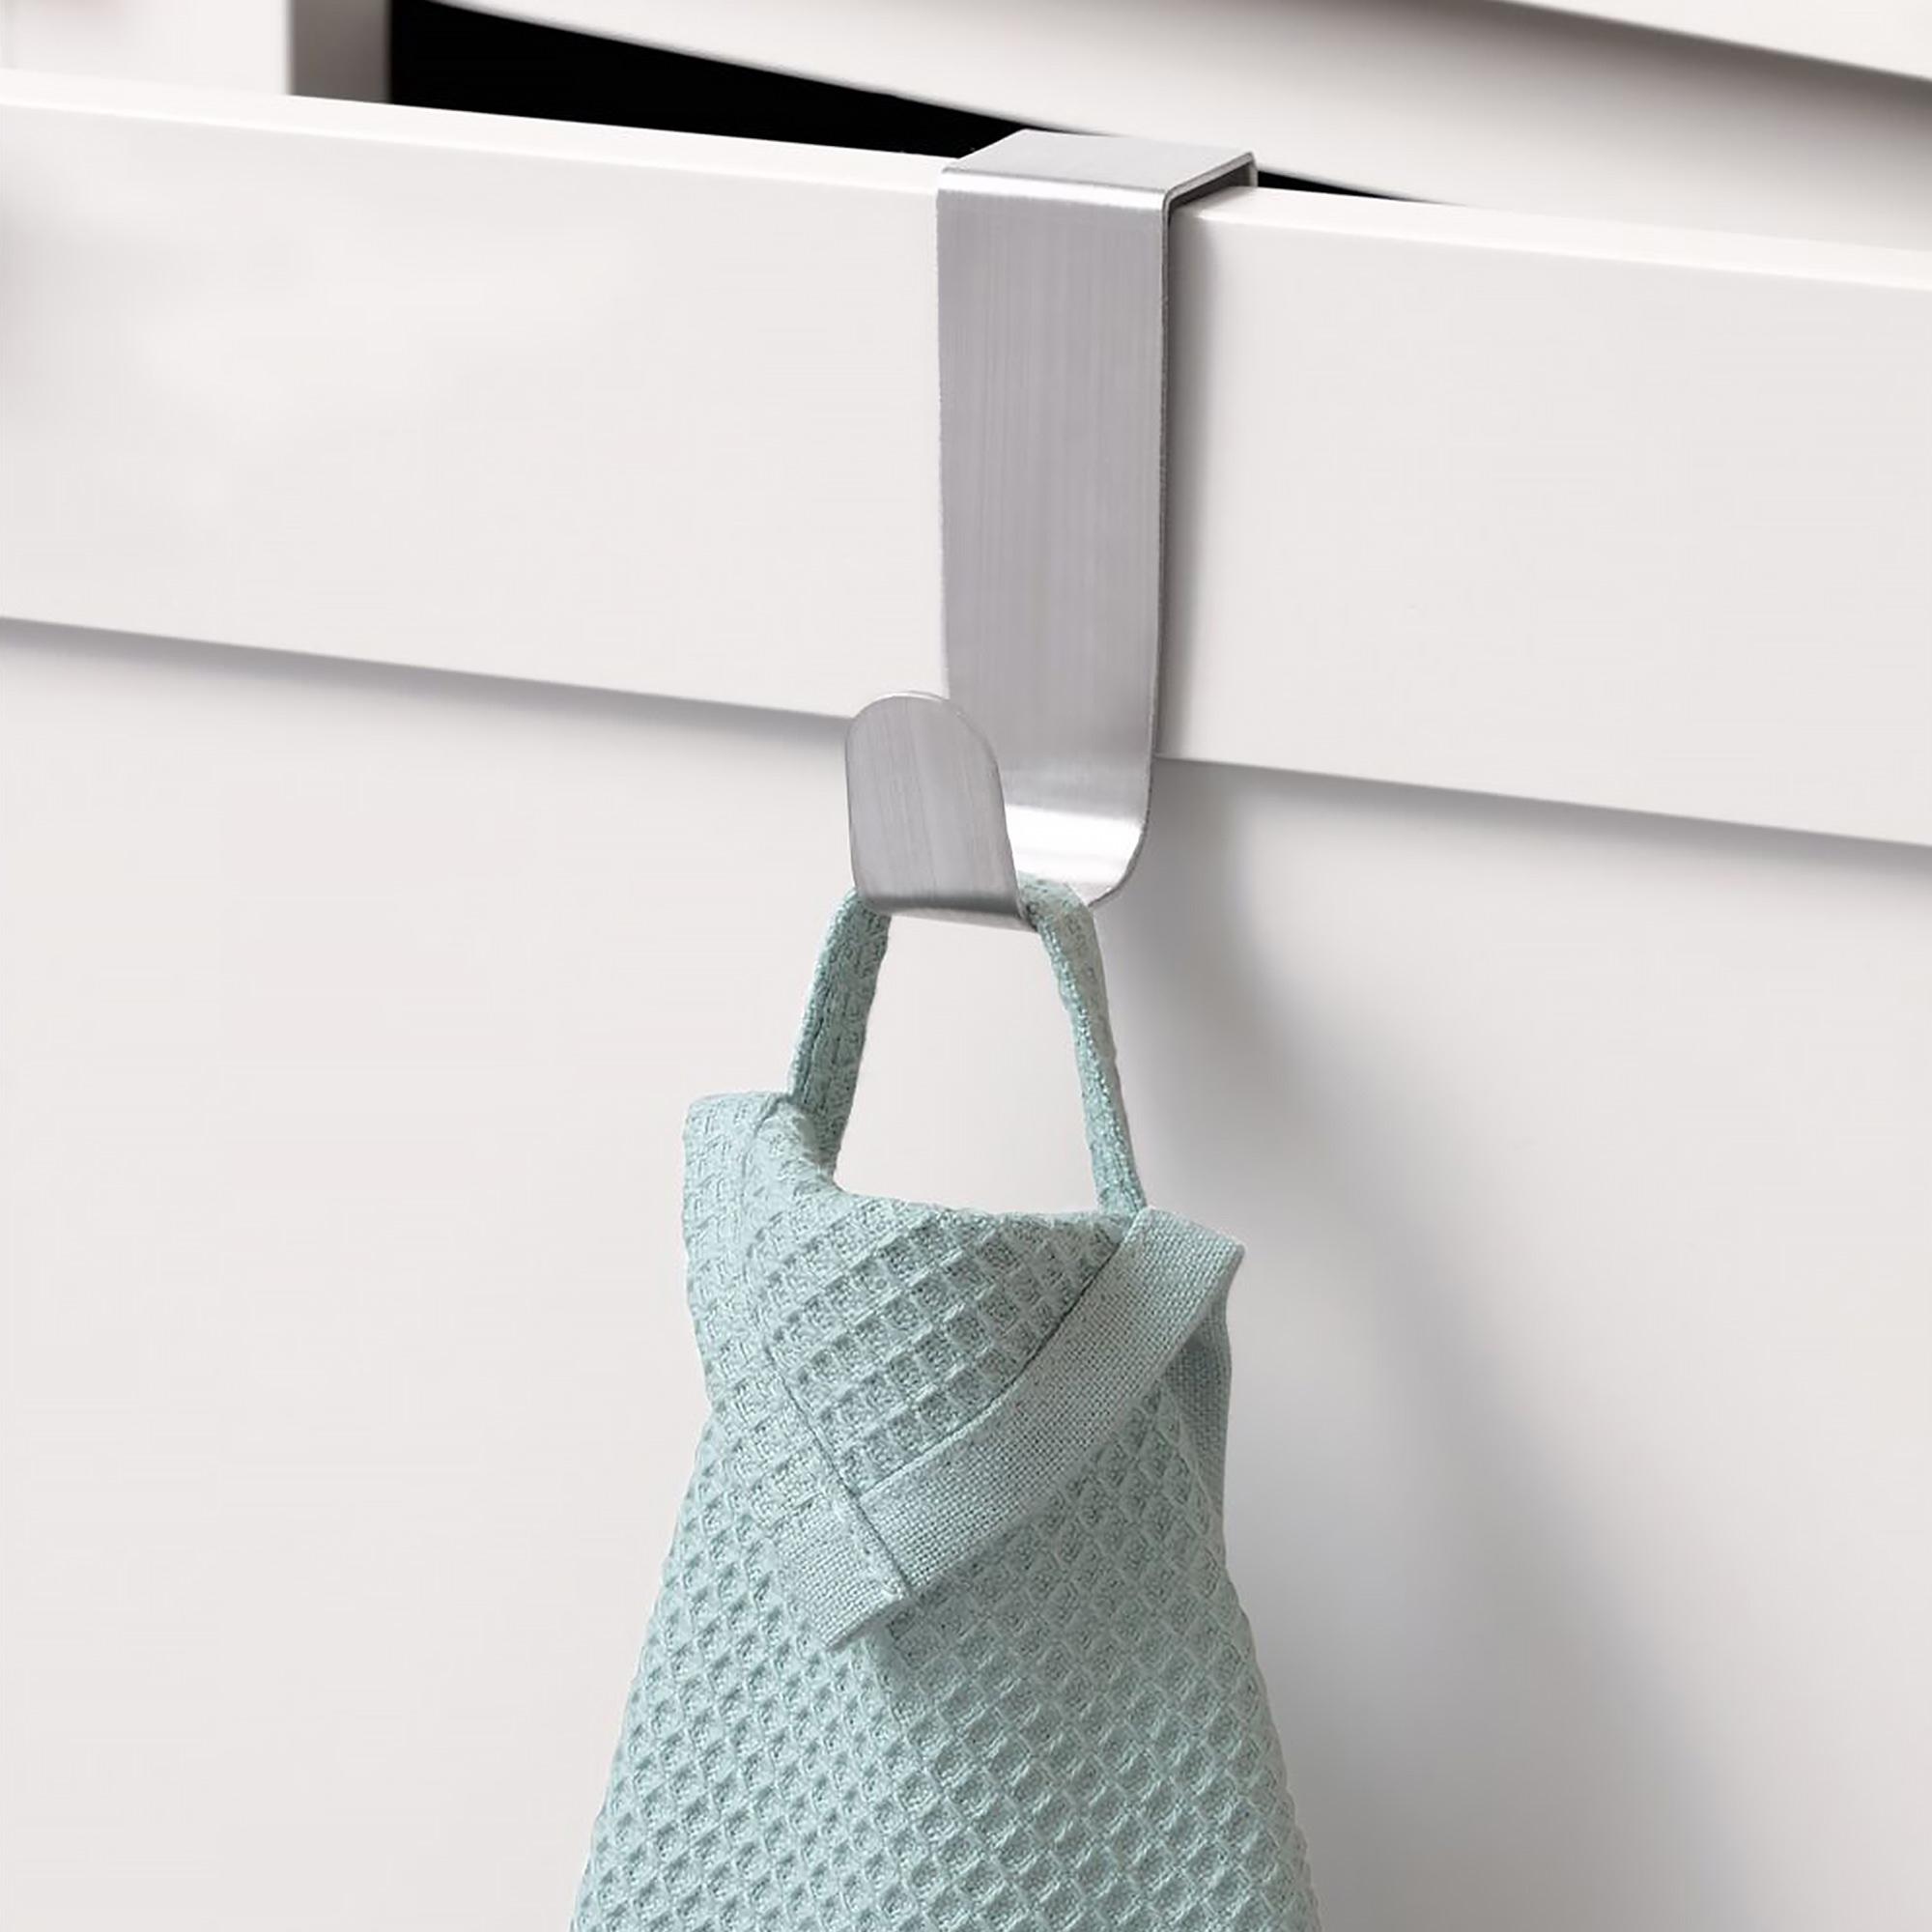 iDesign Forma Over The Cabinet Single Hook Steel Image 3